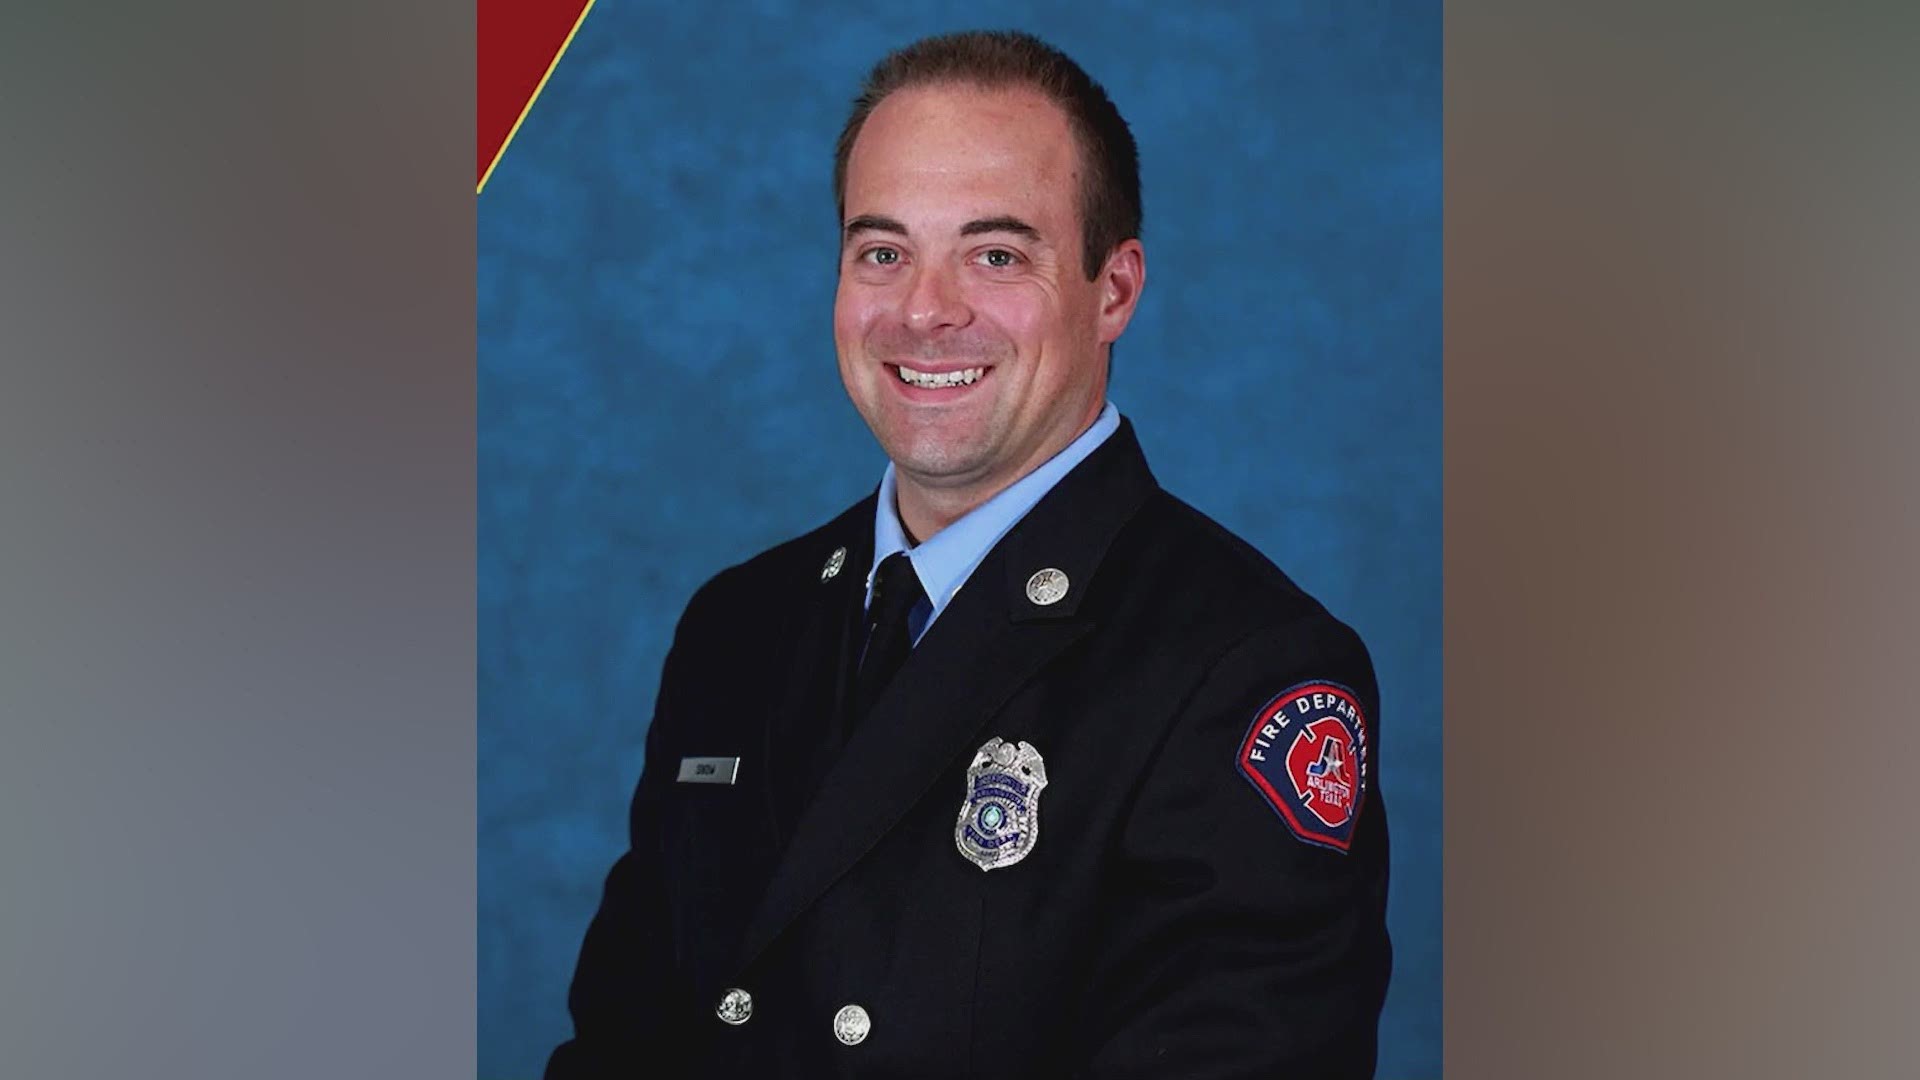 Arlington firefighter Elijah Snow died while he was on a trip to Mexico, according to the Arlington Fire Department. He was with Arlington fire for eight years.